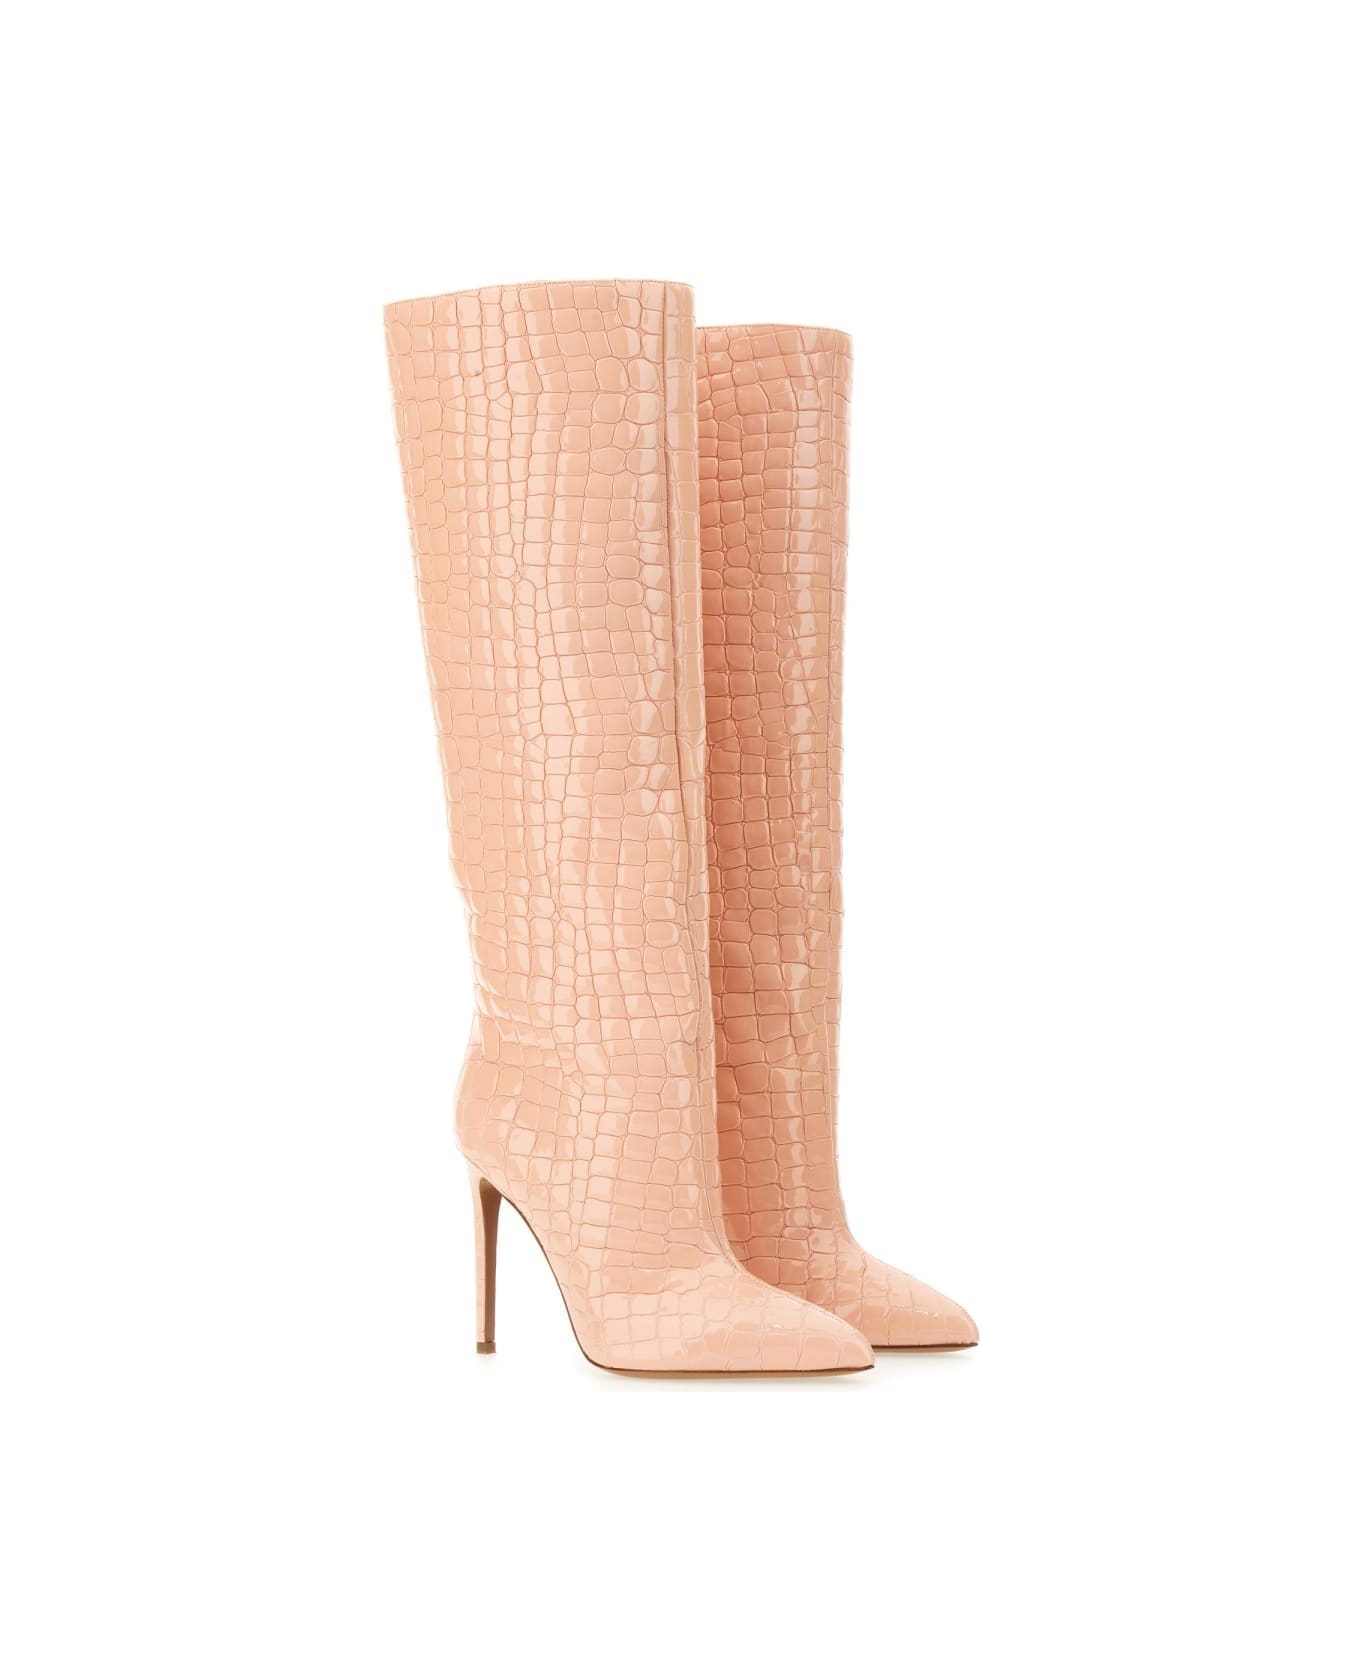 Paris Texas Leather Boot - PINK